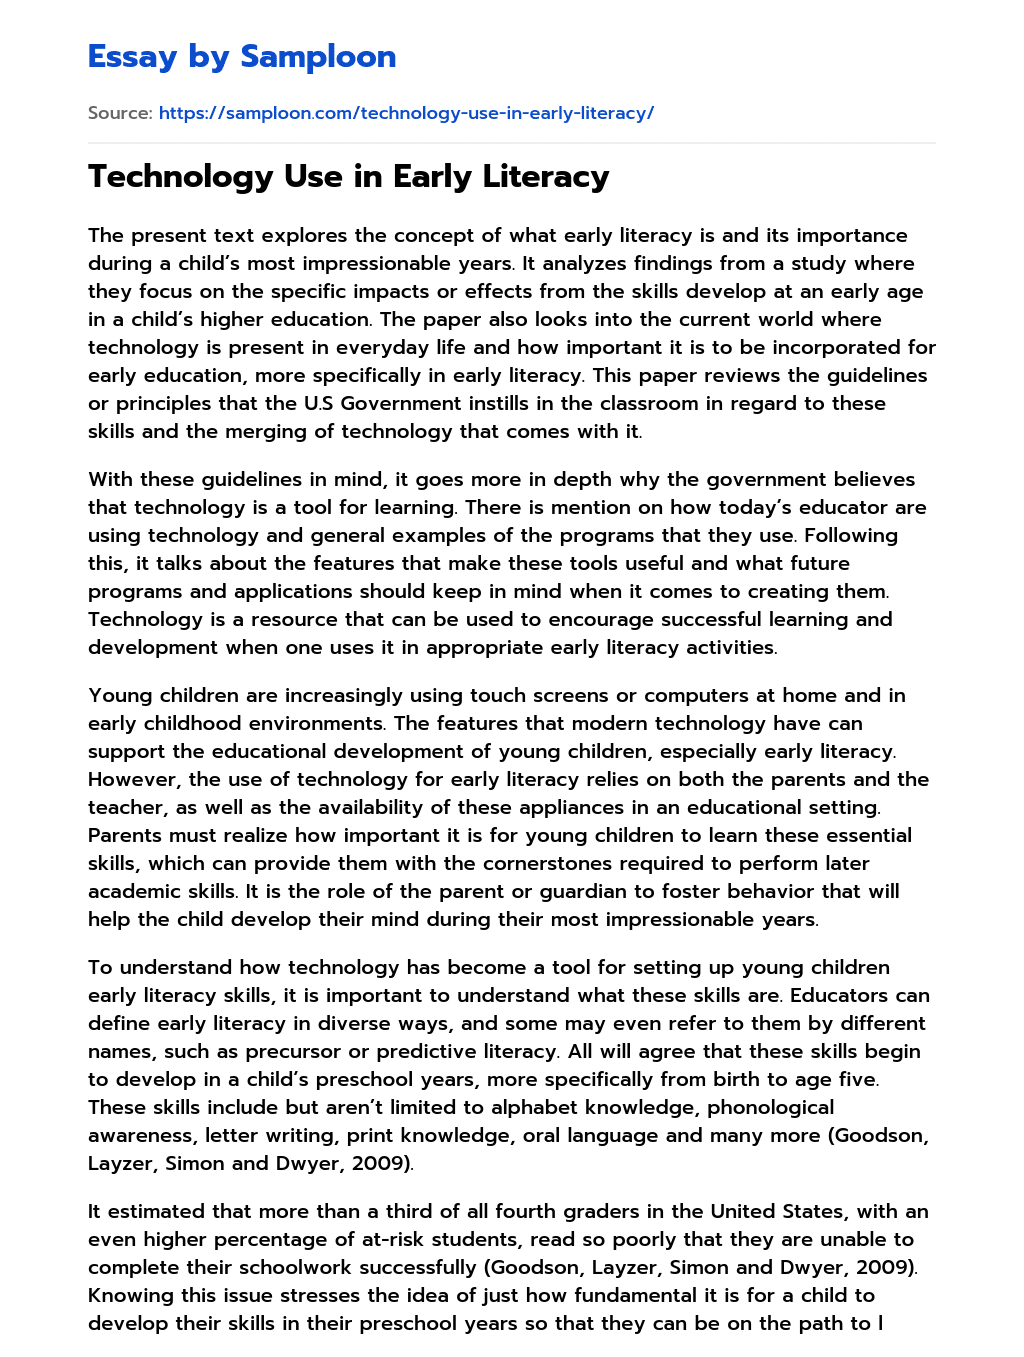 Technology Use in Early Literacy essay